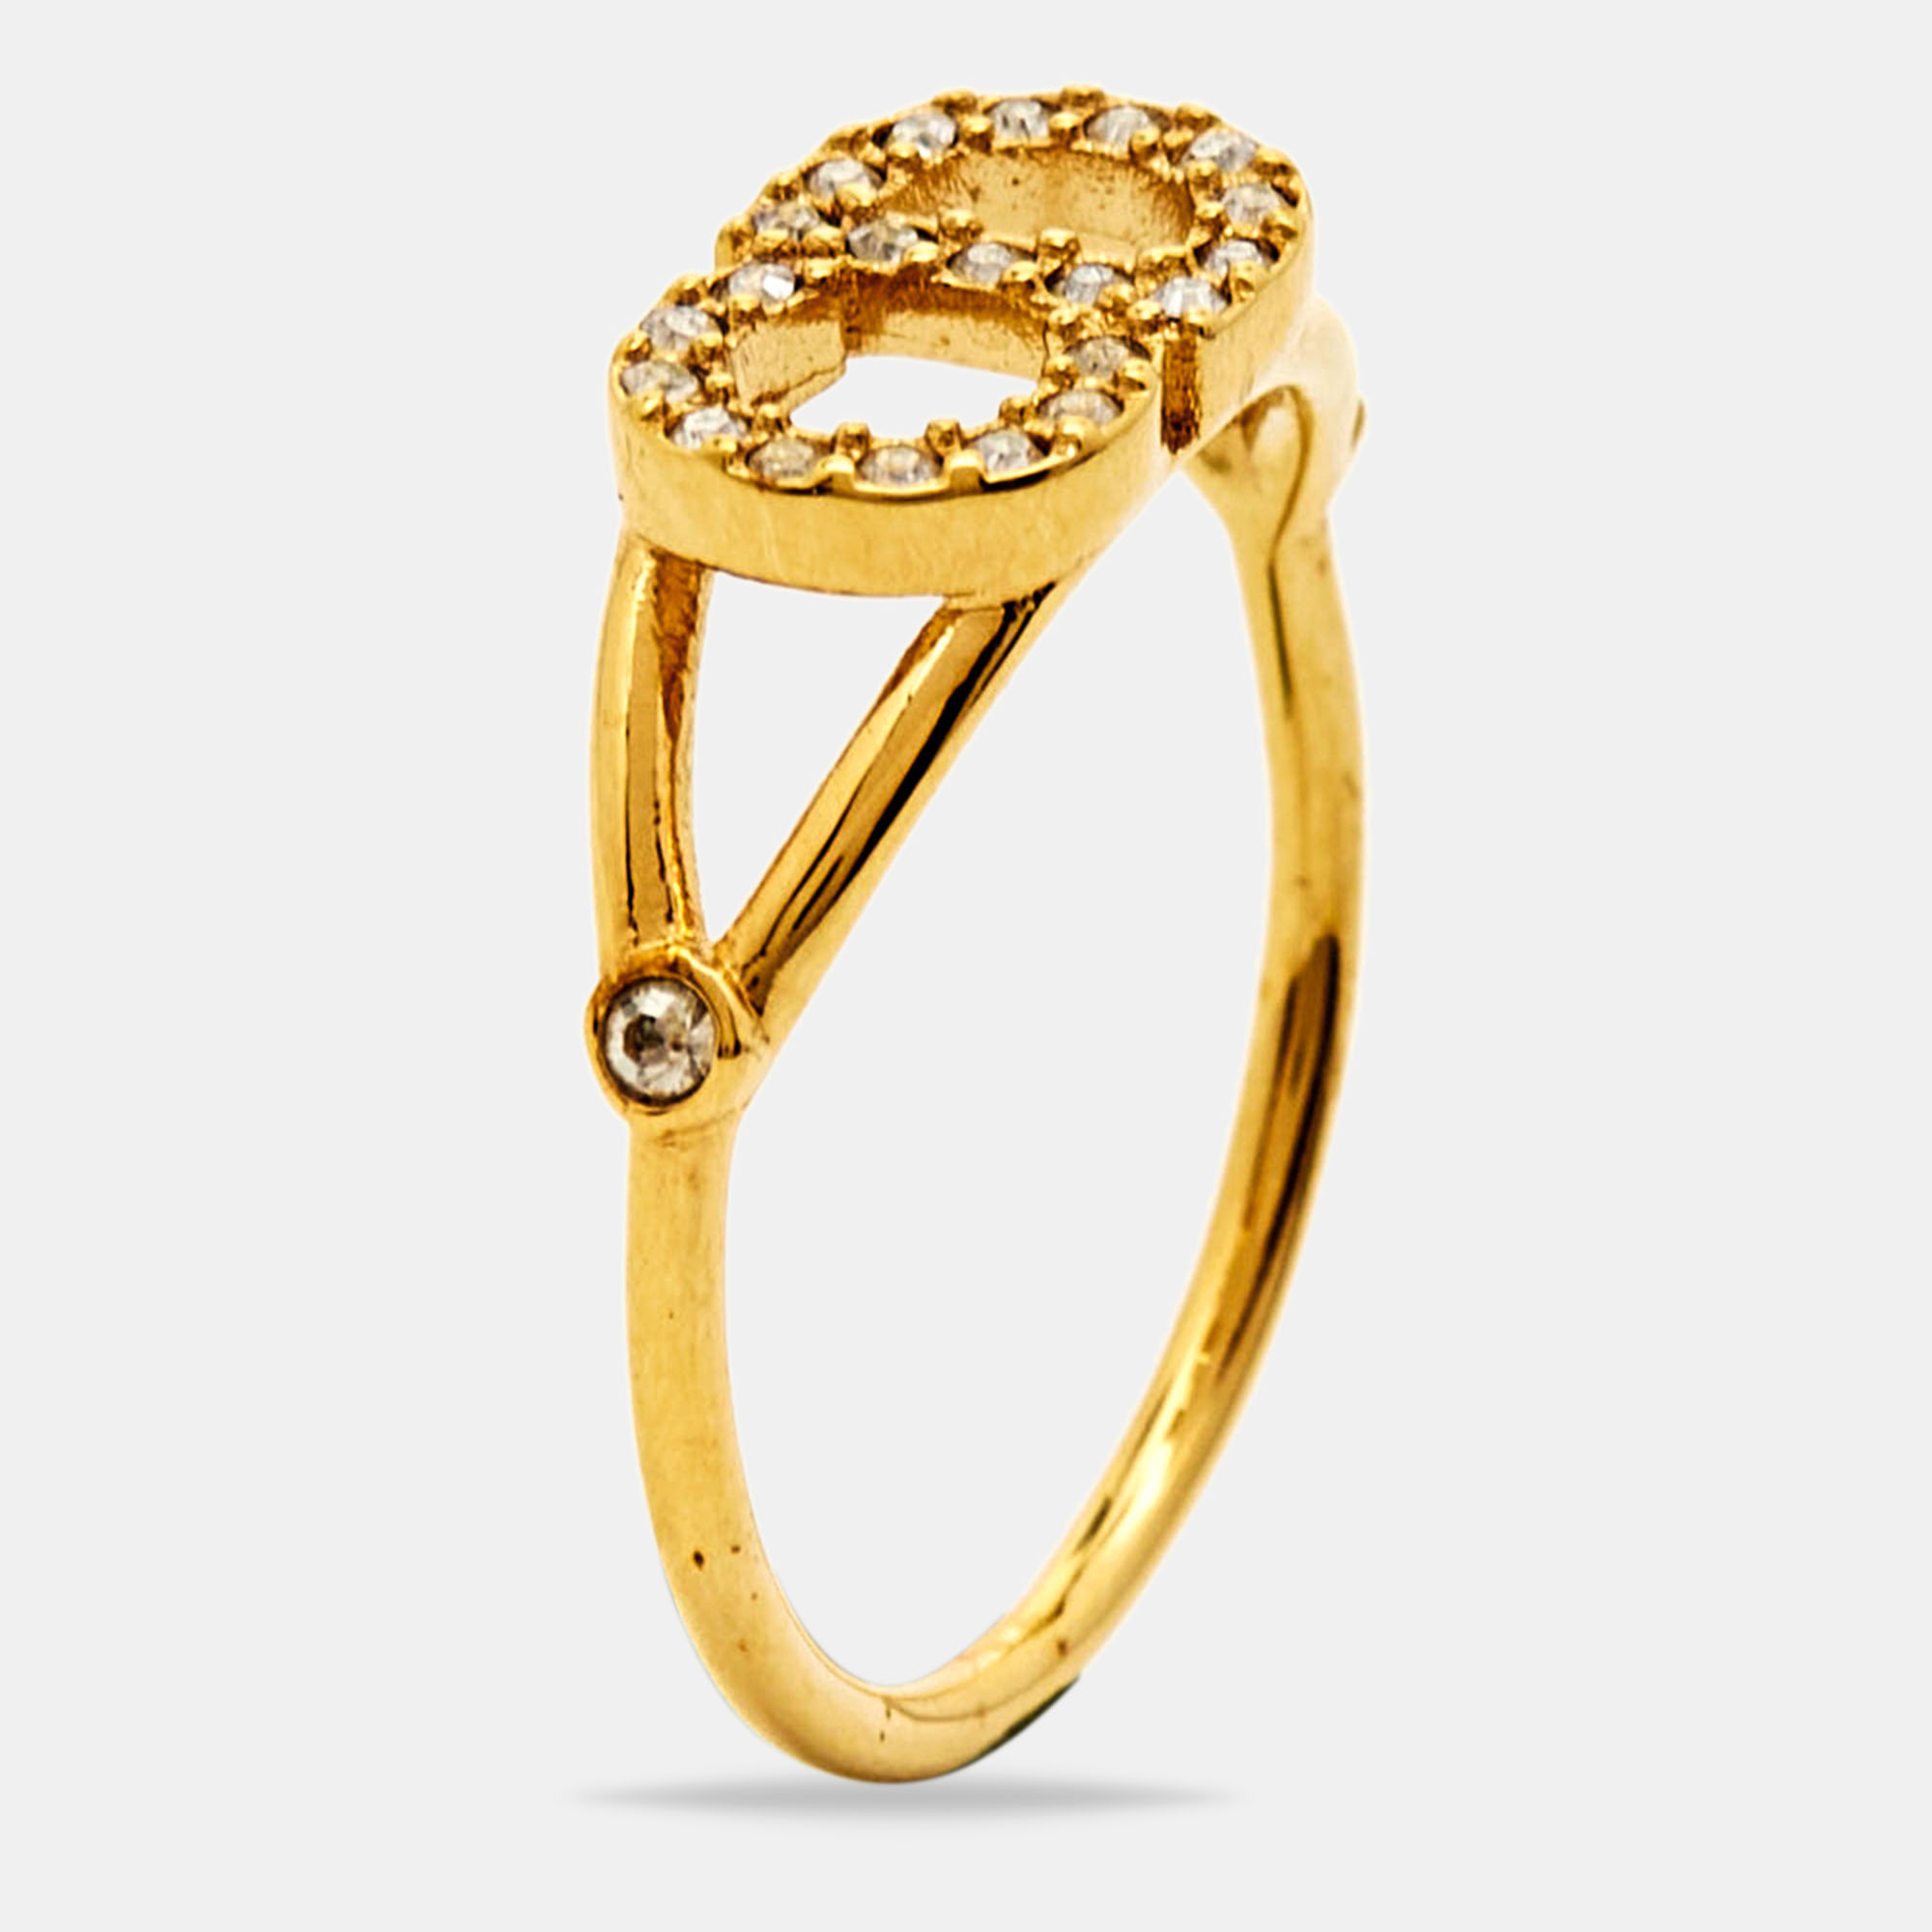 To adorn your fingers most elegantly Dior brings to you this stylish ring. It has been carved using top quality materials and will elevate your look instantly.